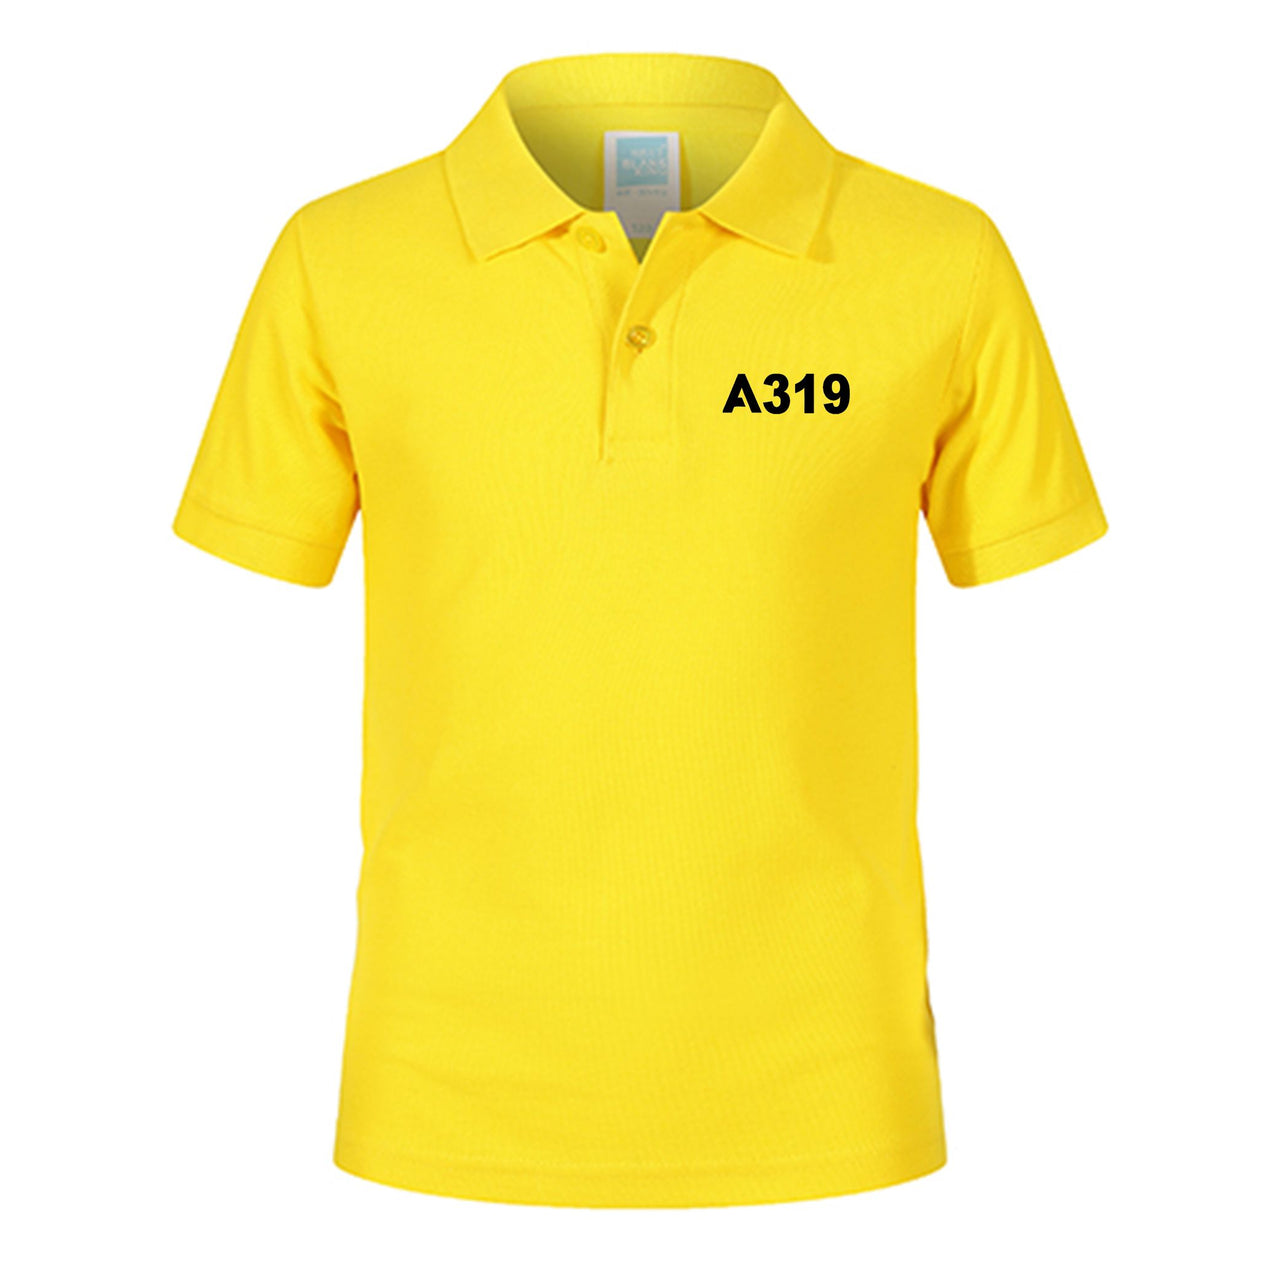 A319 Flat Text Designed Children Polo T-Shirts